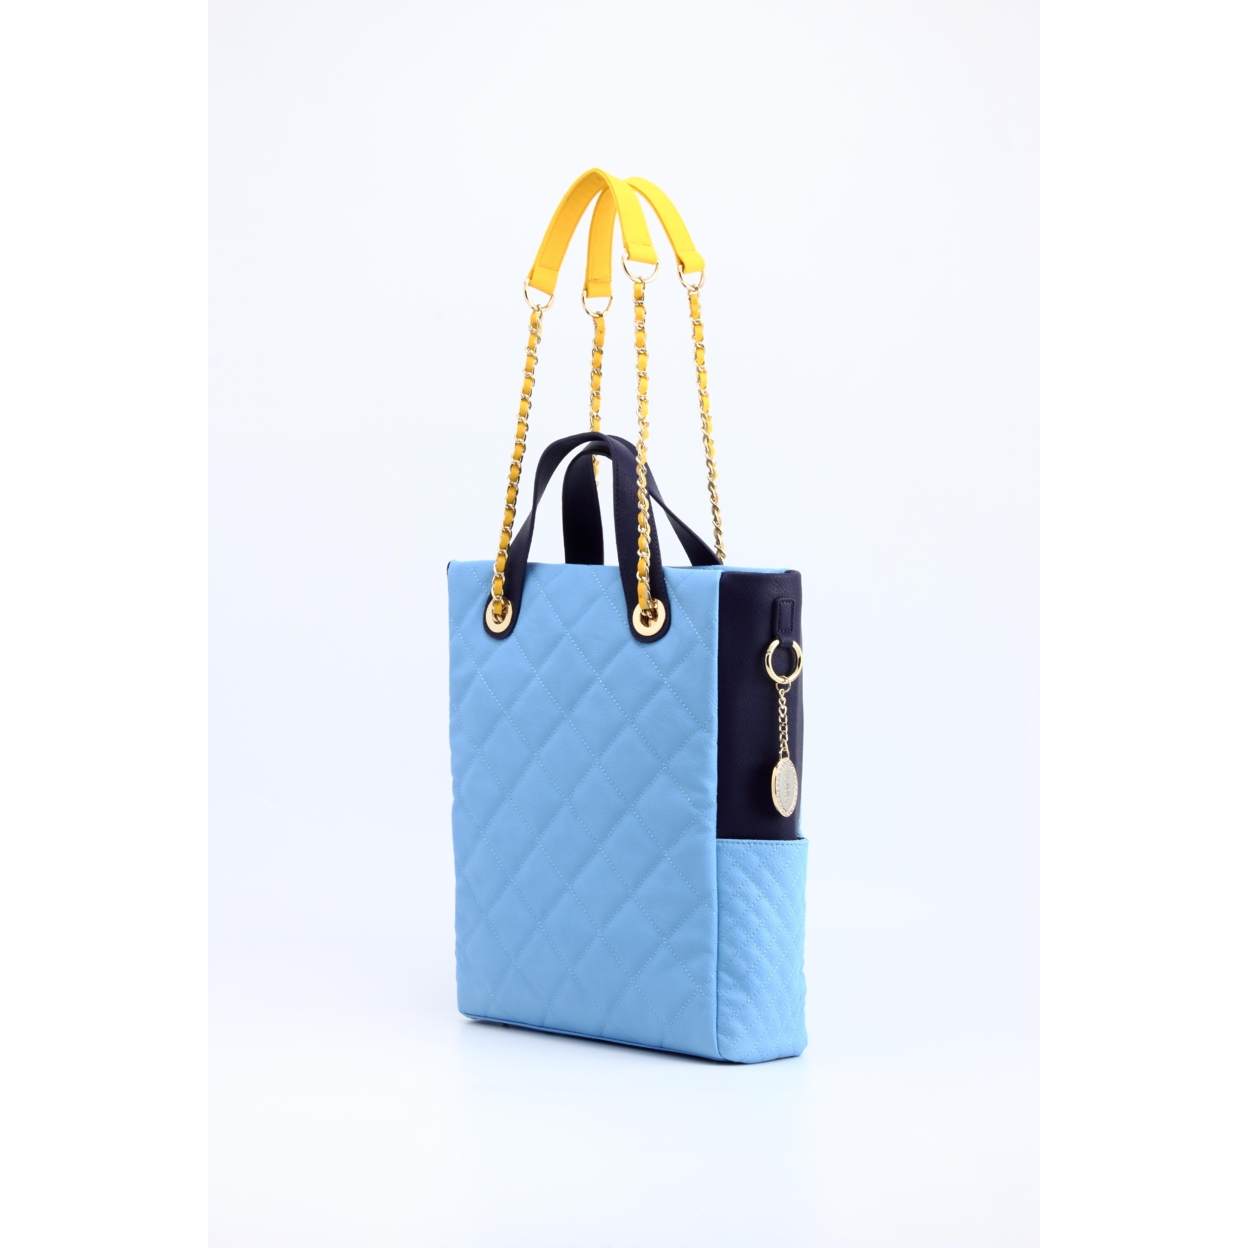 SCORE!'s Kat Travel Tote For Business, Work, Or School Quilted Shoulder Bag - Light Blue, Navy Blue And Yellow Gold